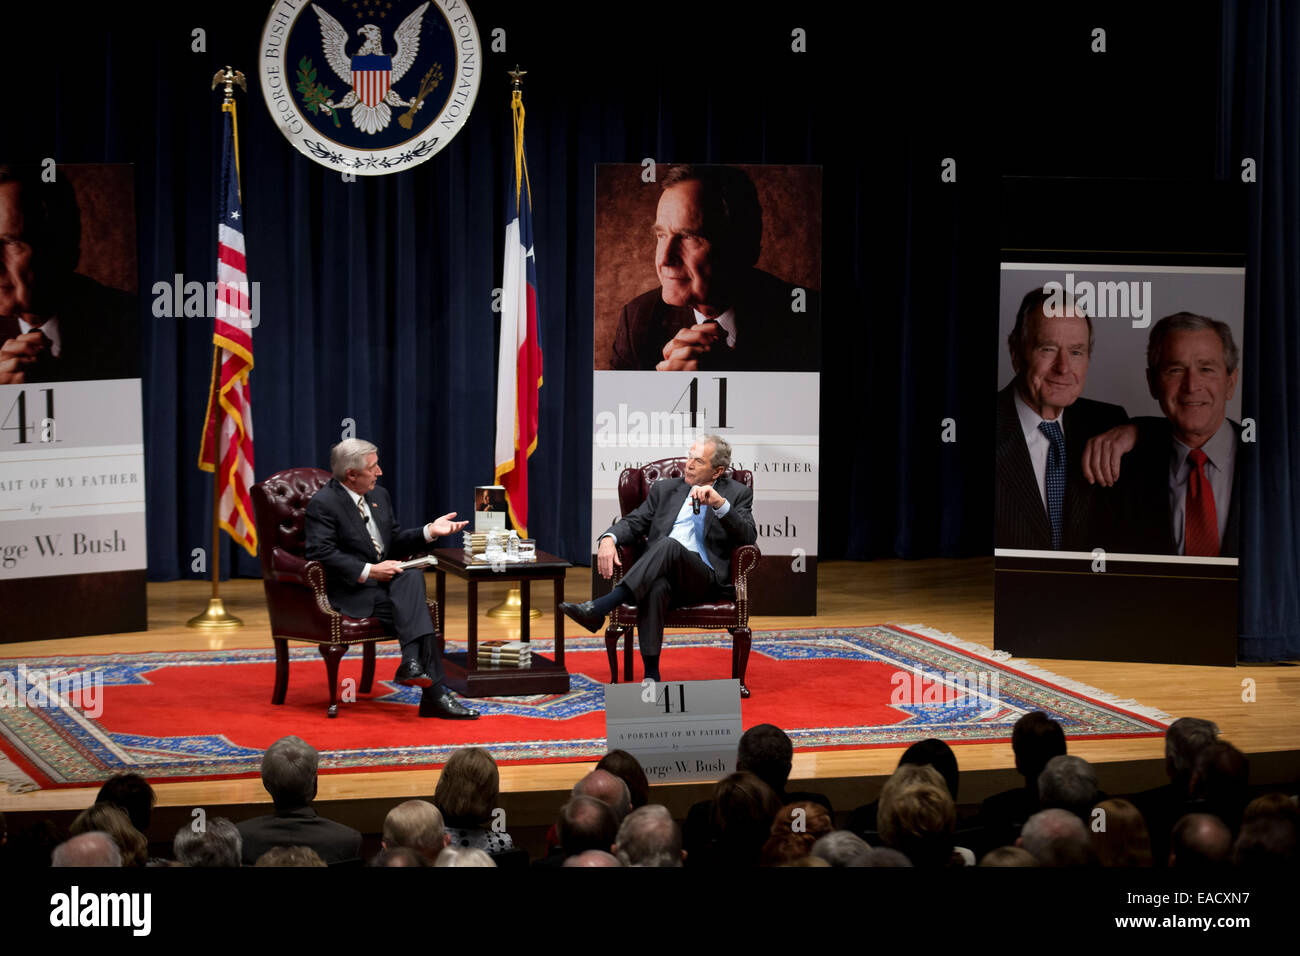 College Station, Texas, USA. 11th November, 2014. Former U.S. President George W. Bush, r, talks about his new book, '41 A Portrait of My Father' wiith former chief of staff Andrew Card during a book event at the Bush Library at Texas A&M University. The elder George H.W. Bush and wife Barbara were in the audience. Credit:  Bob Daemmrich/Alamy Live News Stock Photo